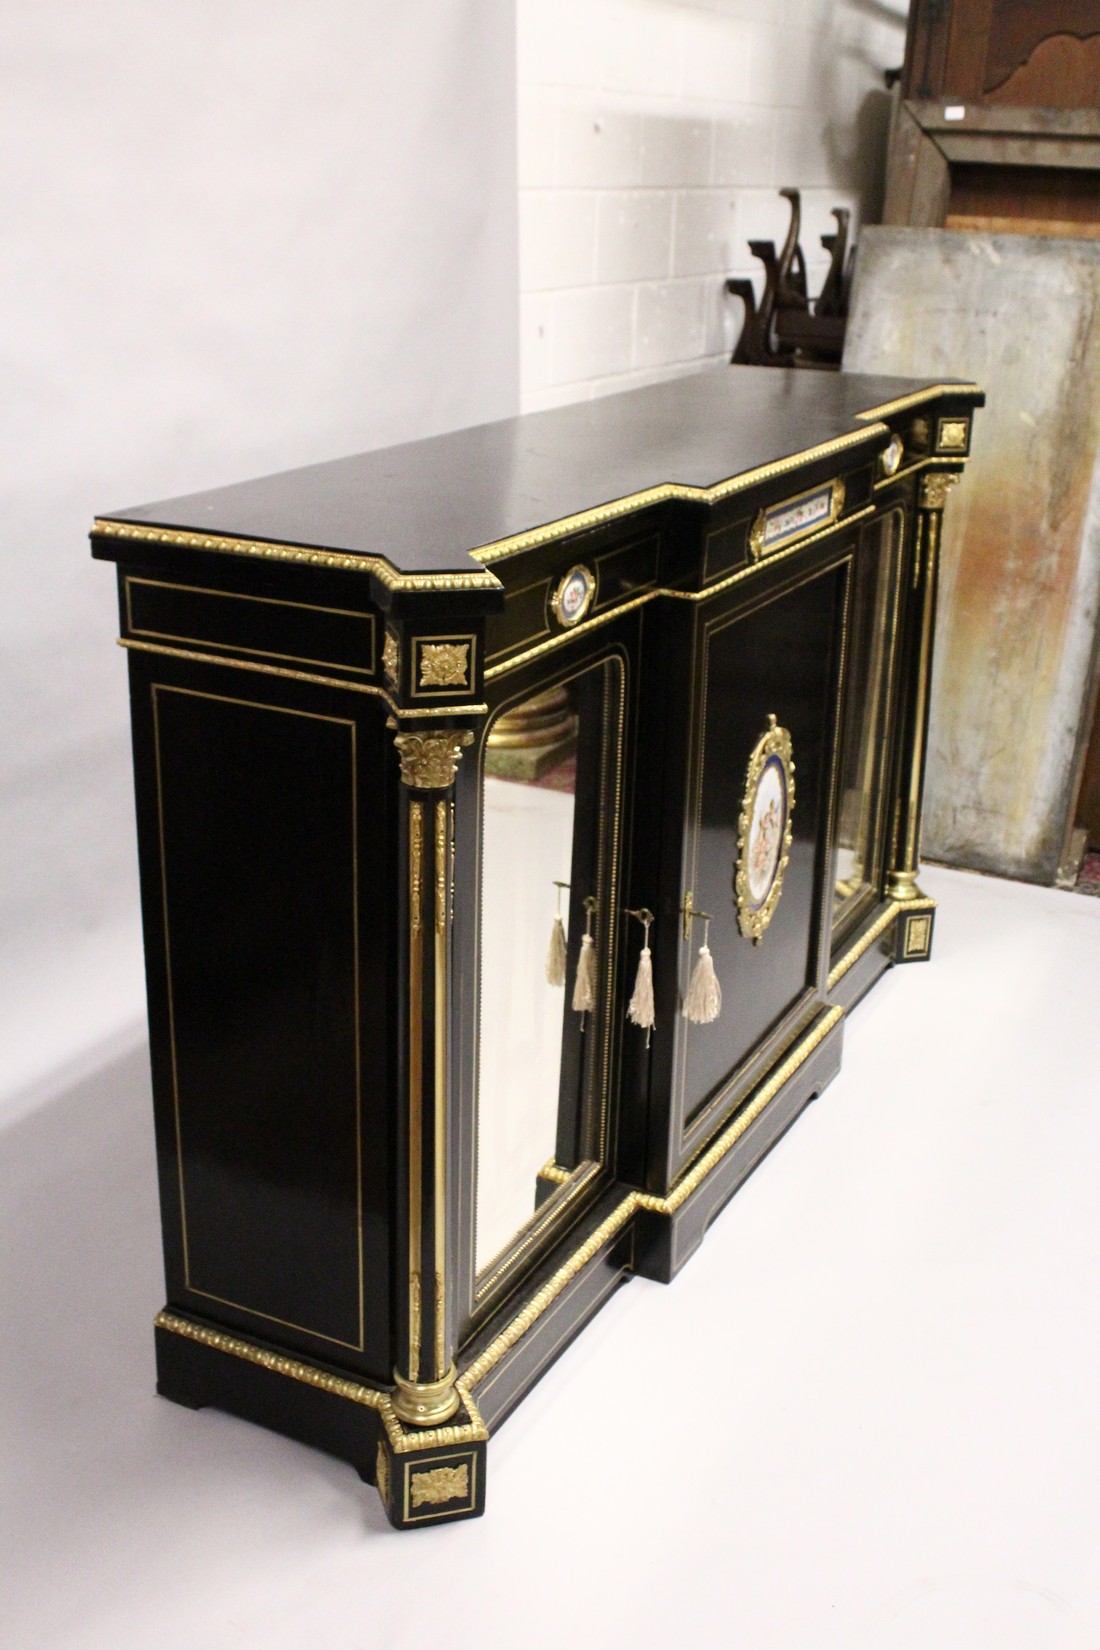 A VERY GOOD 19TH CENTURY FRENCH EBONY BREAK FRONT CREDENZA, with ornate mounts inset with Sevres - Image 3 of 6